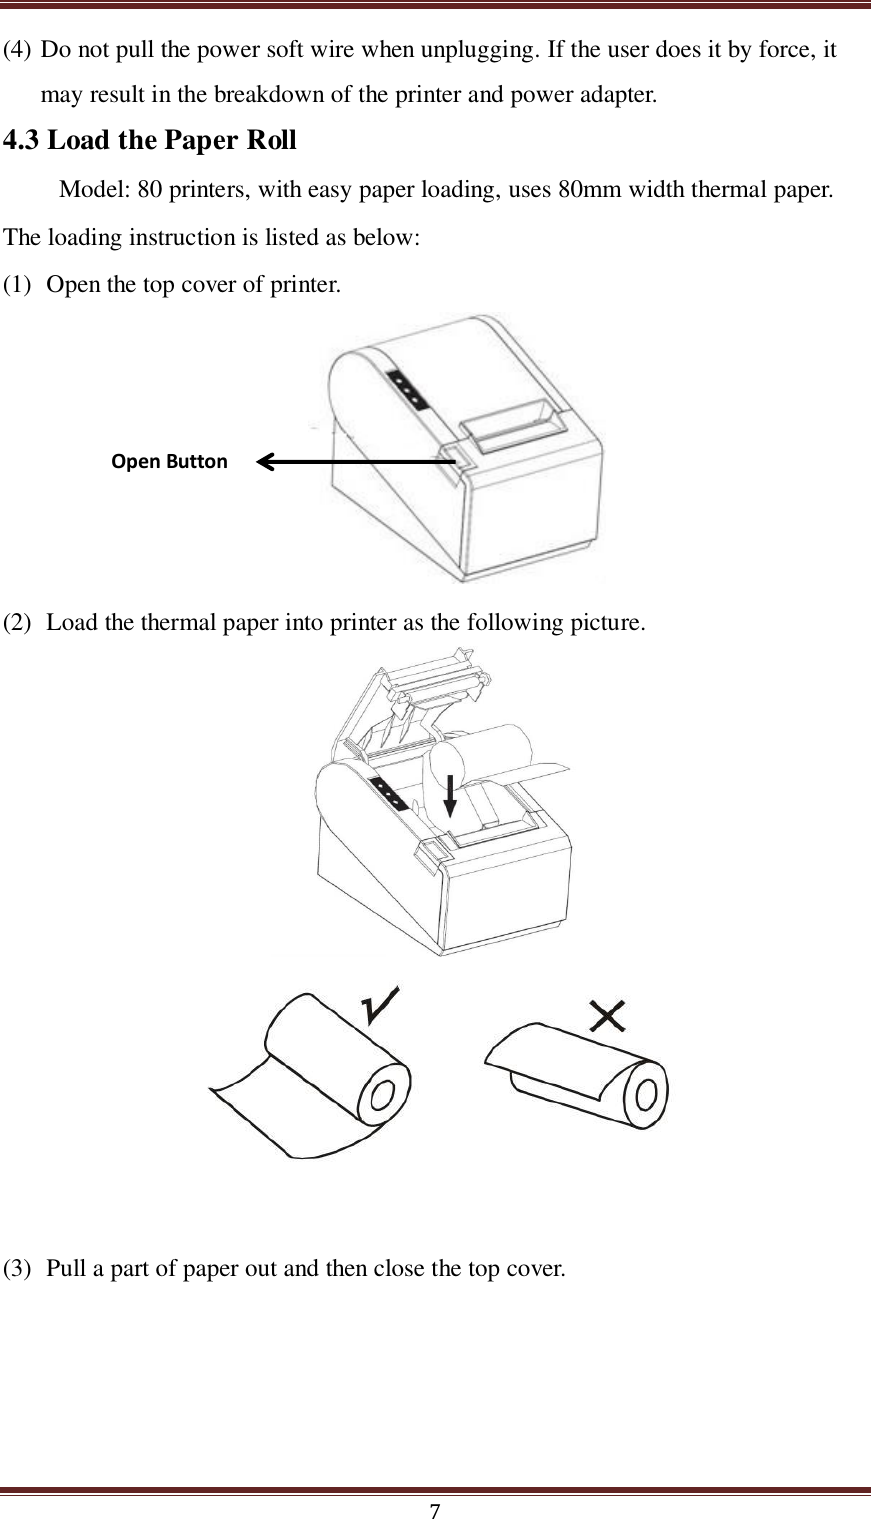  7 (4) Do not pull the power soft wire when unplugging. If the user does it by force, it may result in the breakdown of the printer and power adapter. 4.3 Load the Paper Roll Model: 80 printers, with easy paper loading, uses 80mm width thermal paper. The loading instruction is listed as below: (1) Open the top cover of printer.   (2) Load the thermal paper into printer as the following picture.        (3) Pull a part of paper out and then close the top cover.  Open Button 